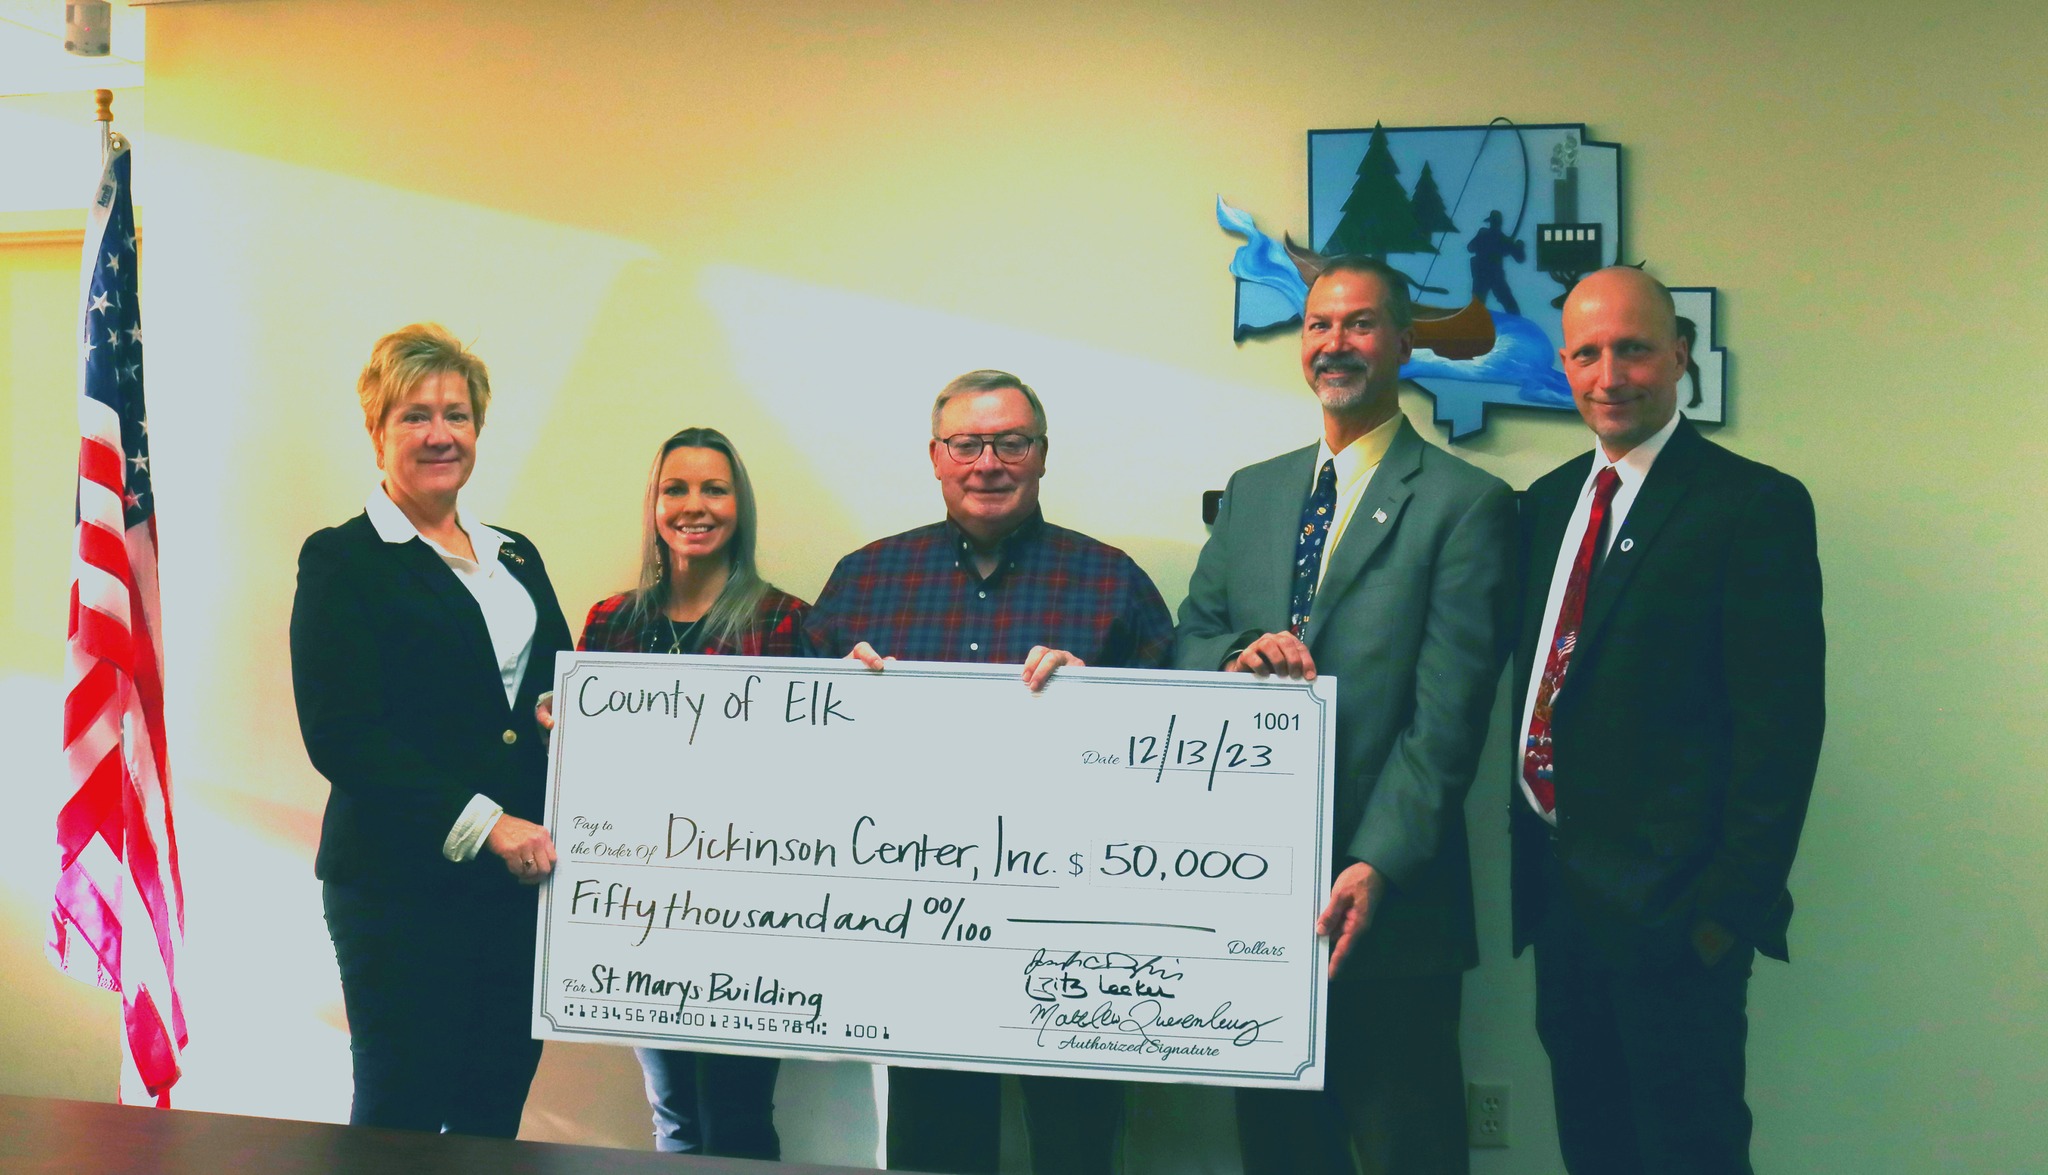 Elk County Commissioners Award $50,000 toward DCI Building Image